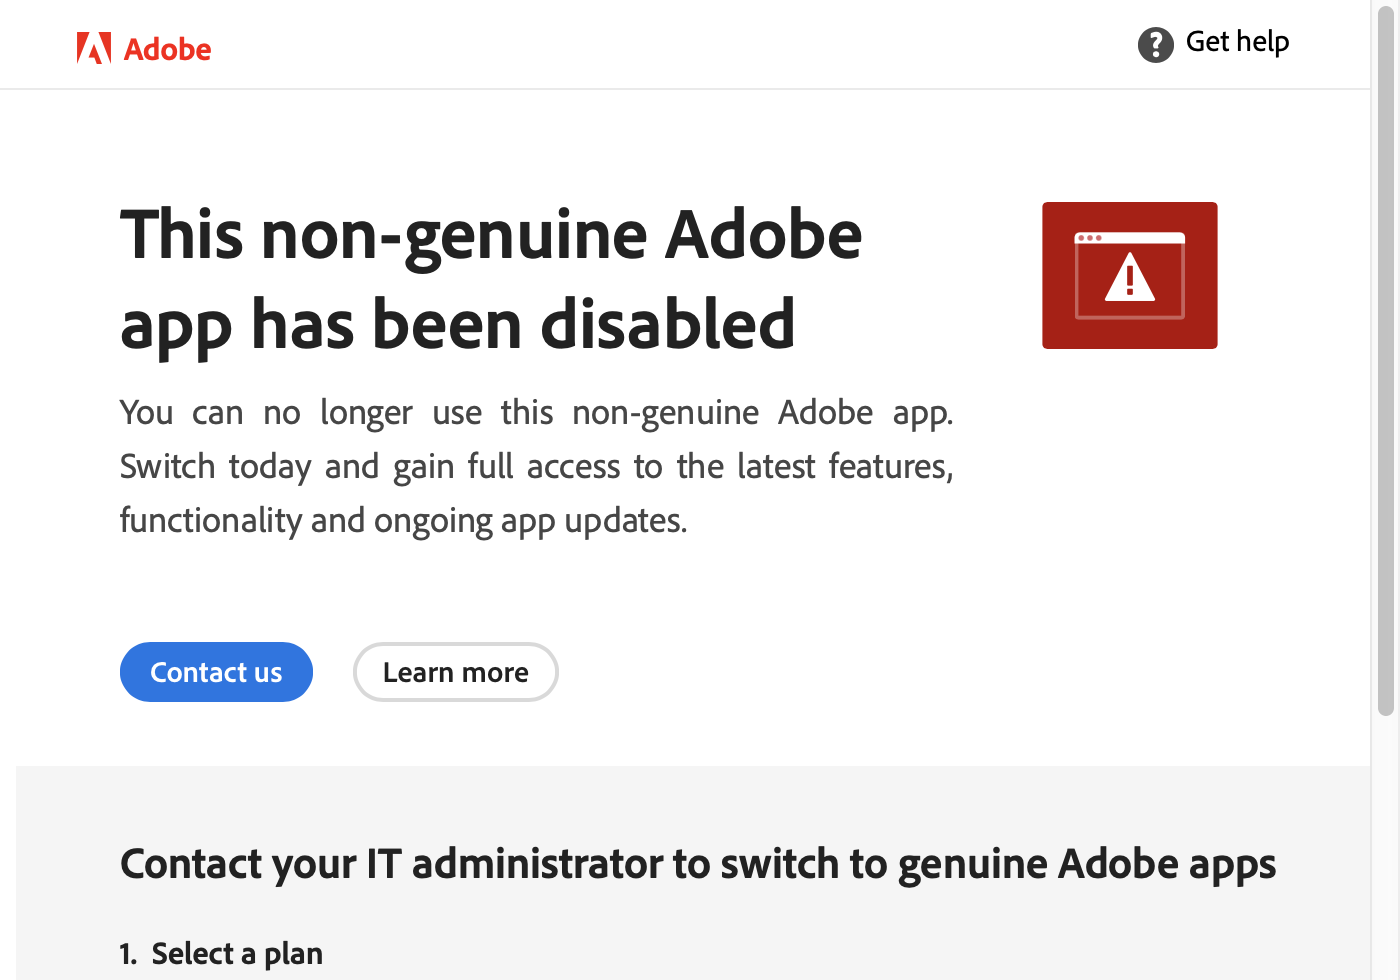 This non-genuine Adobe app has been disabled 超简单解决办法